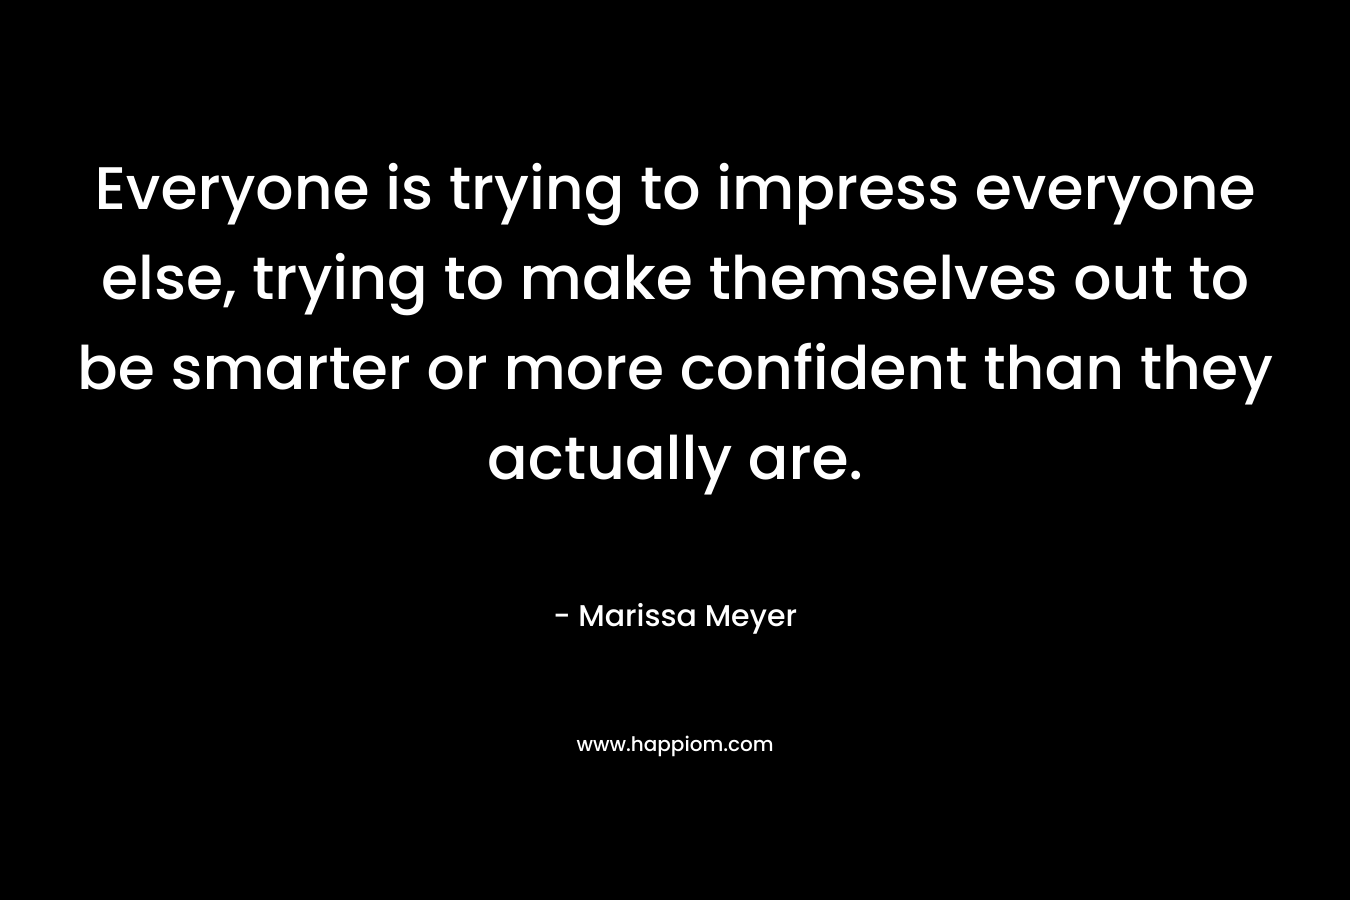 Everyone is trying to impress everyone else, trying to make themselves out to be smarter or more confident than they actually are.